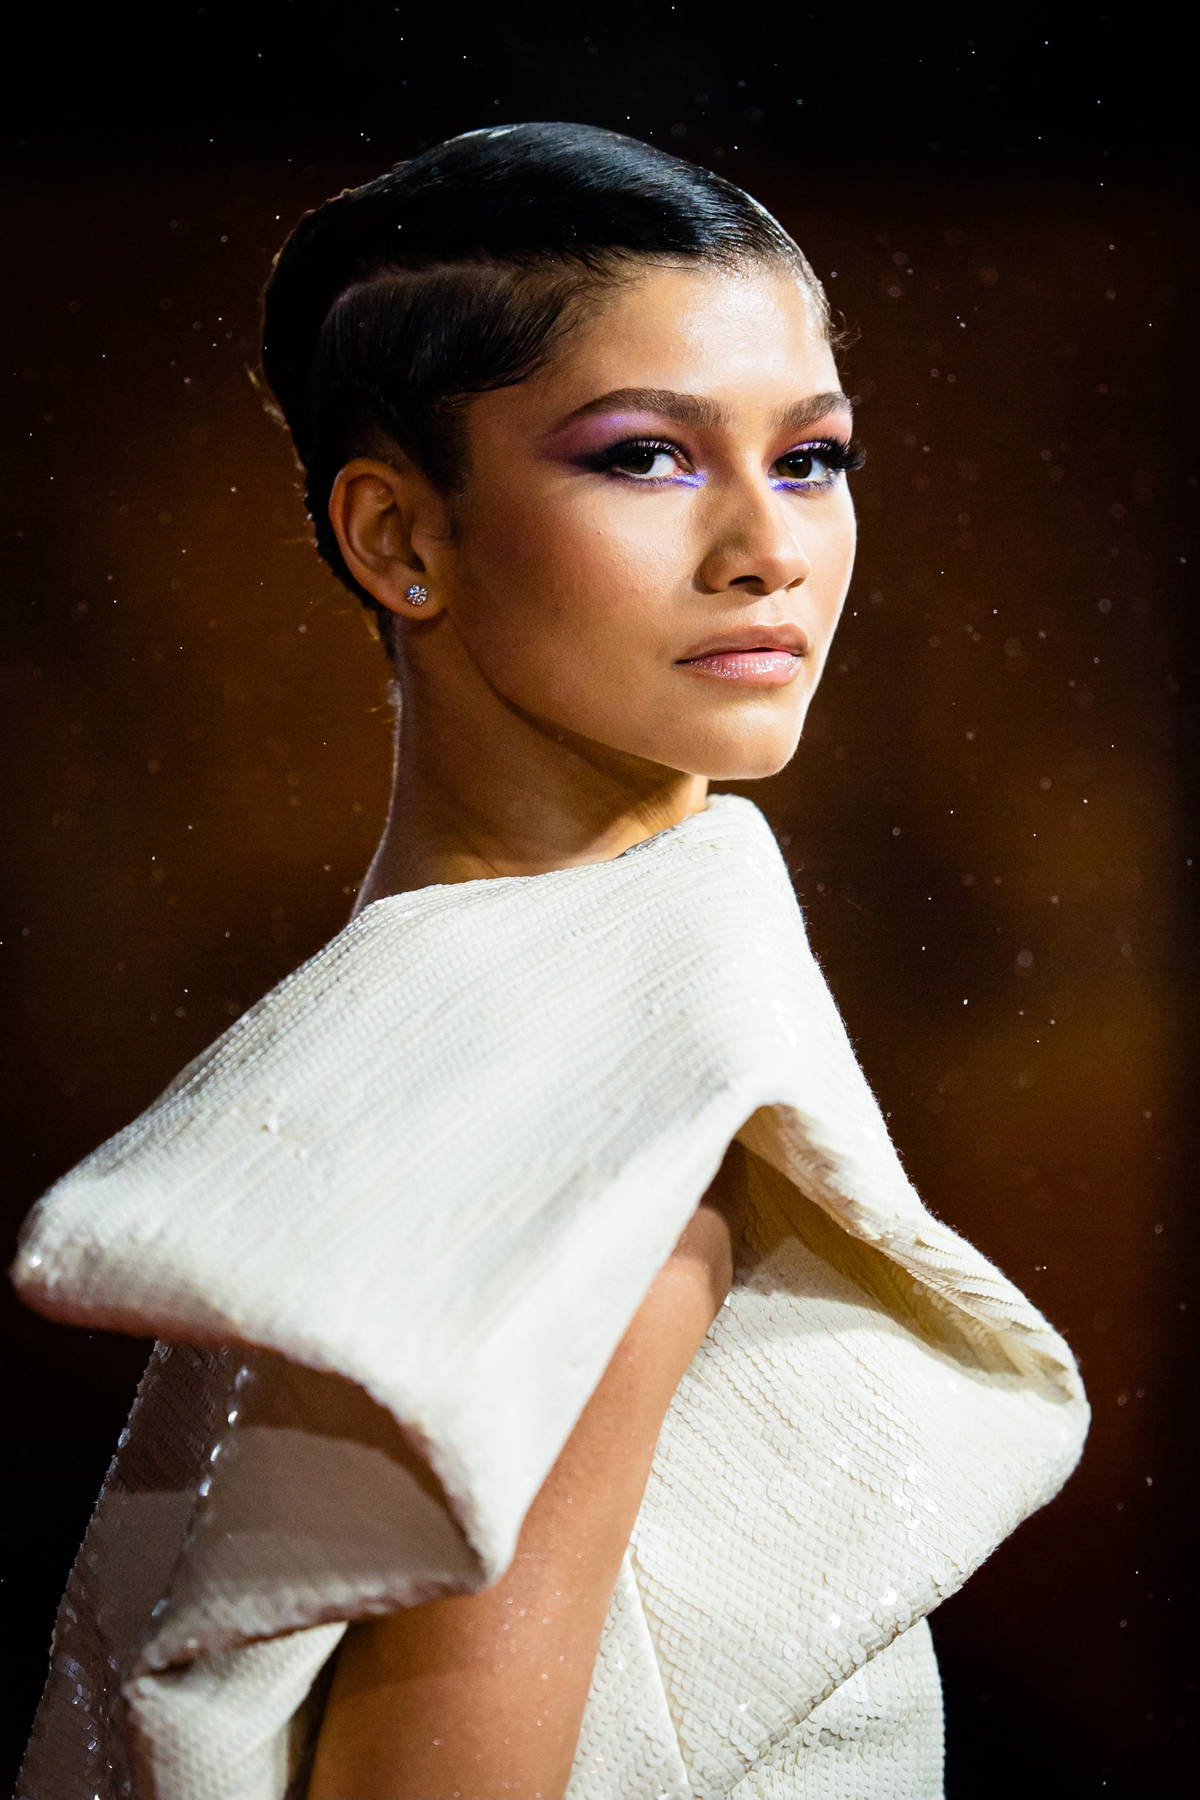 zendaya-attends-the-uk-premiere-of-dune-during-at-odeon-luxe-leicester-square-in-london-uk-181021_15.jpg